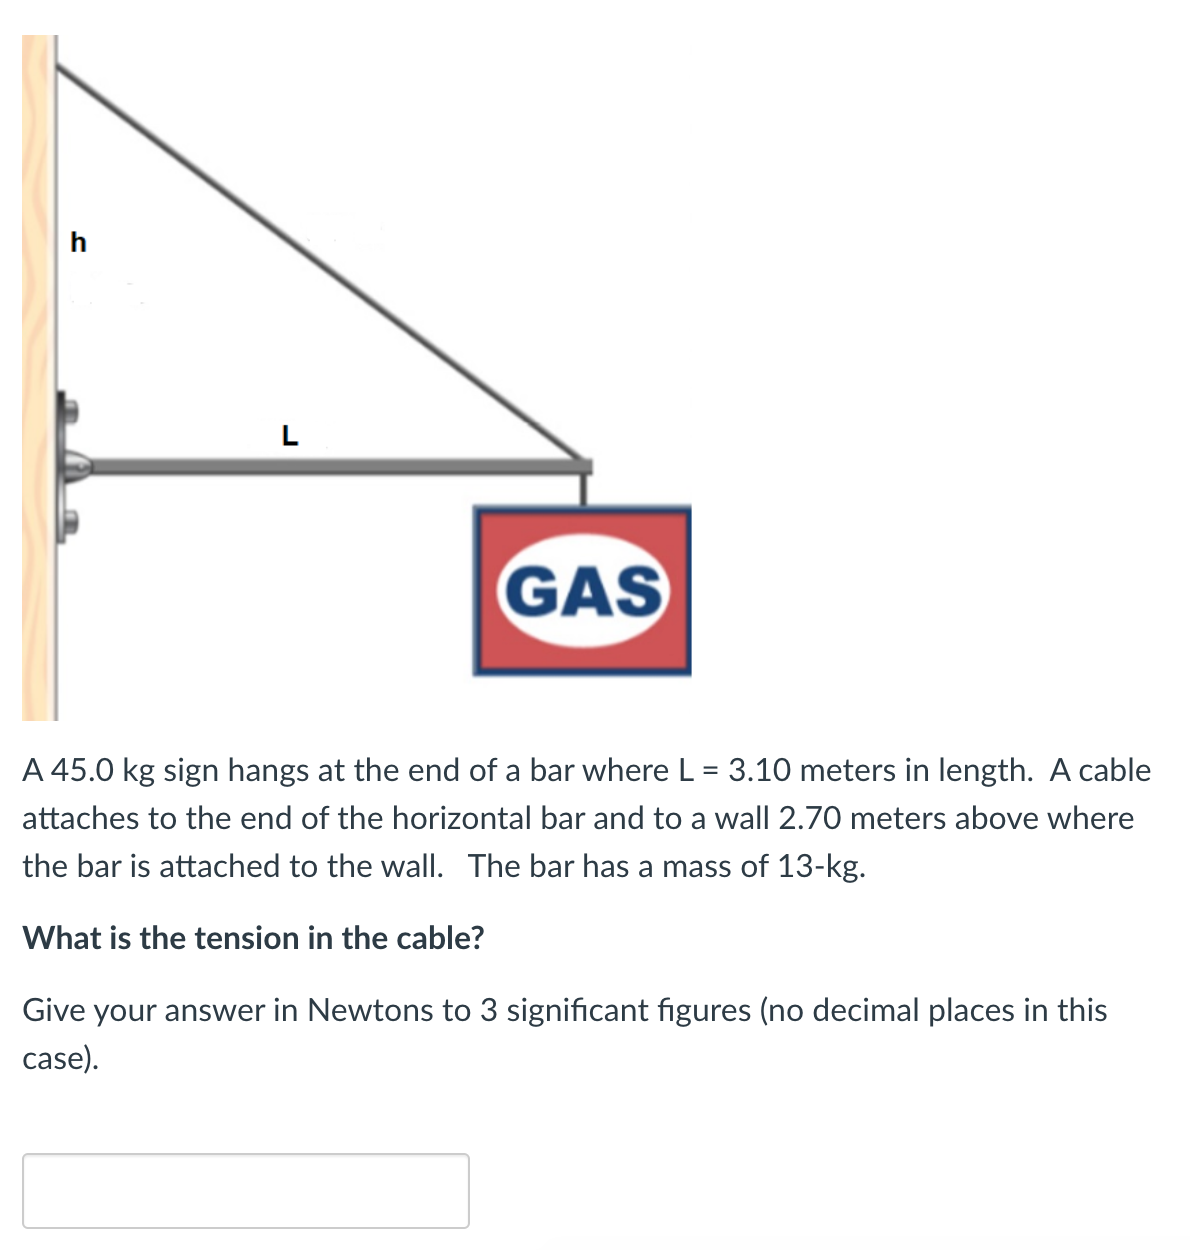 h
L
GAS
A 45.0 kg sign hangs at the end of a bar where L = 3.10 meters in length. A cable
attaches to the end of the horizontal bar and to a wall 2.70 meters above where
the bar is attached to the wall. The bar has a mass of 13-kg.
What is the tension in the cable?
Give your answer in Newtons to 3 significant figures (no decimal places in this
case).